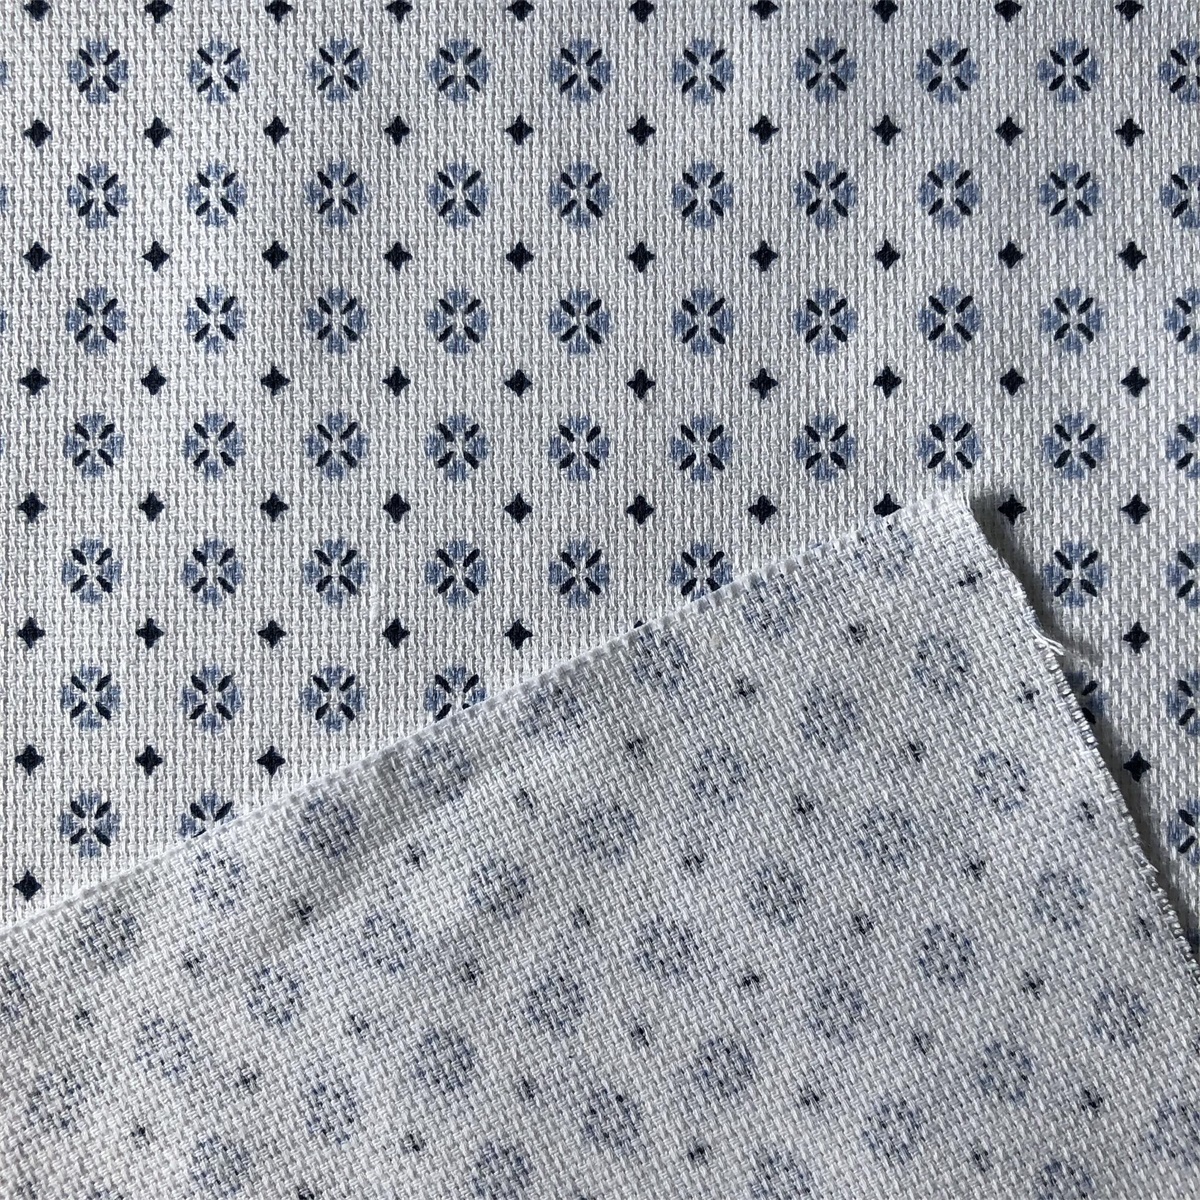 Soft comfortable Cotton Fabric for men's shirts 100% cotton printed on yarn dyed chambray dobby woven shirts fabric